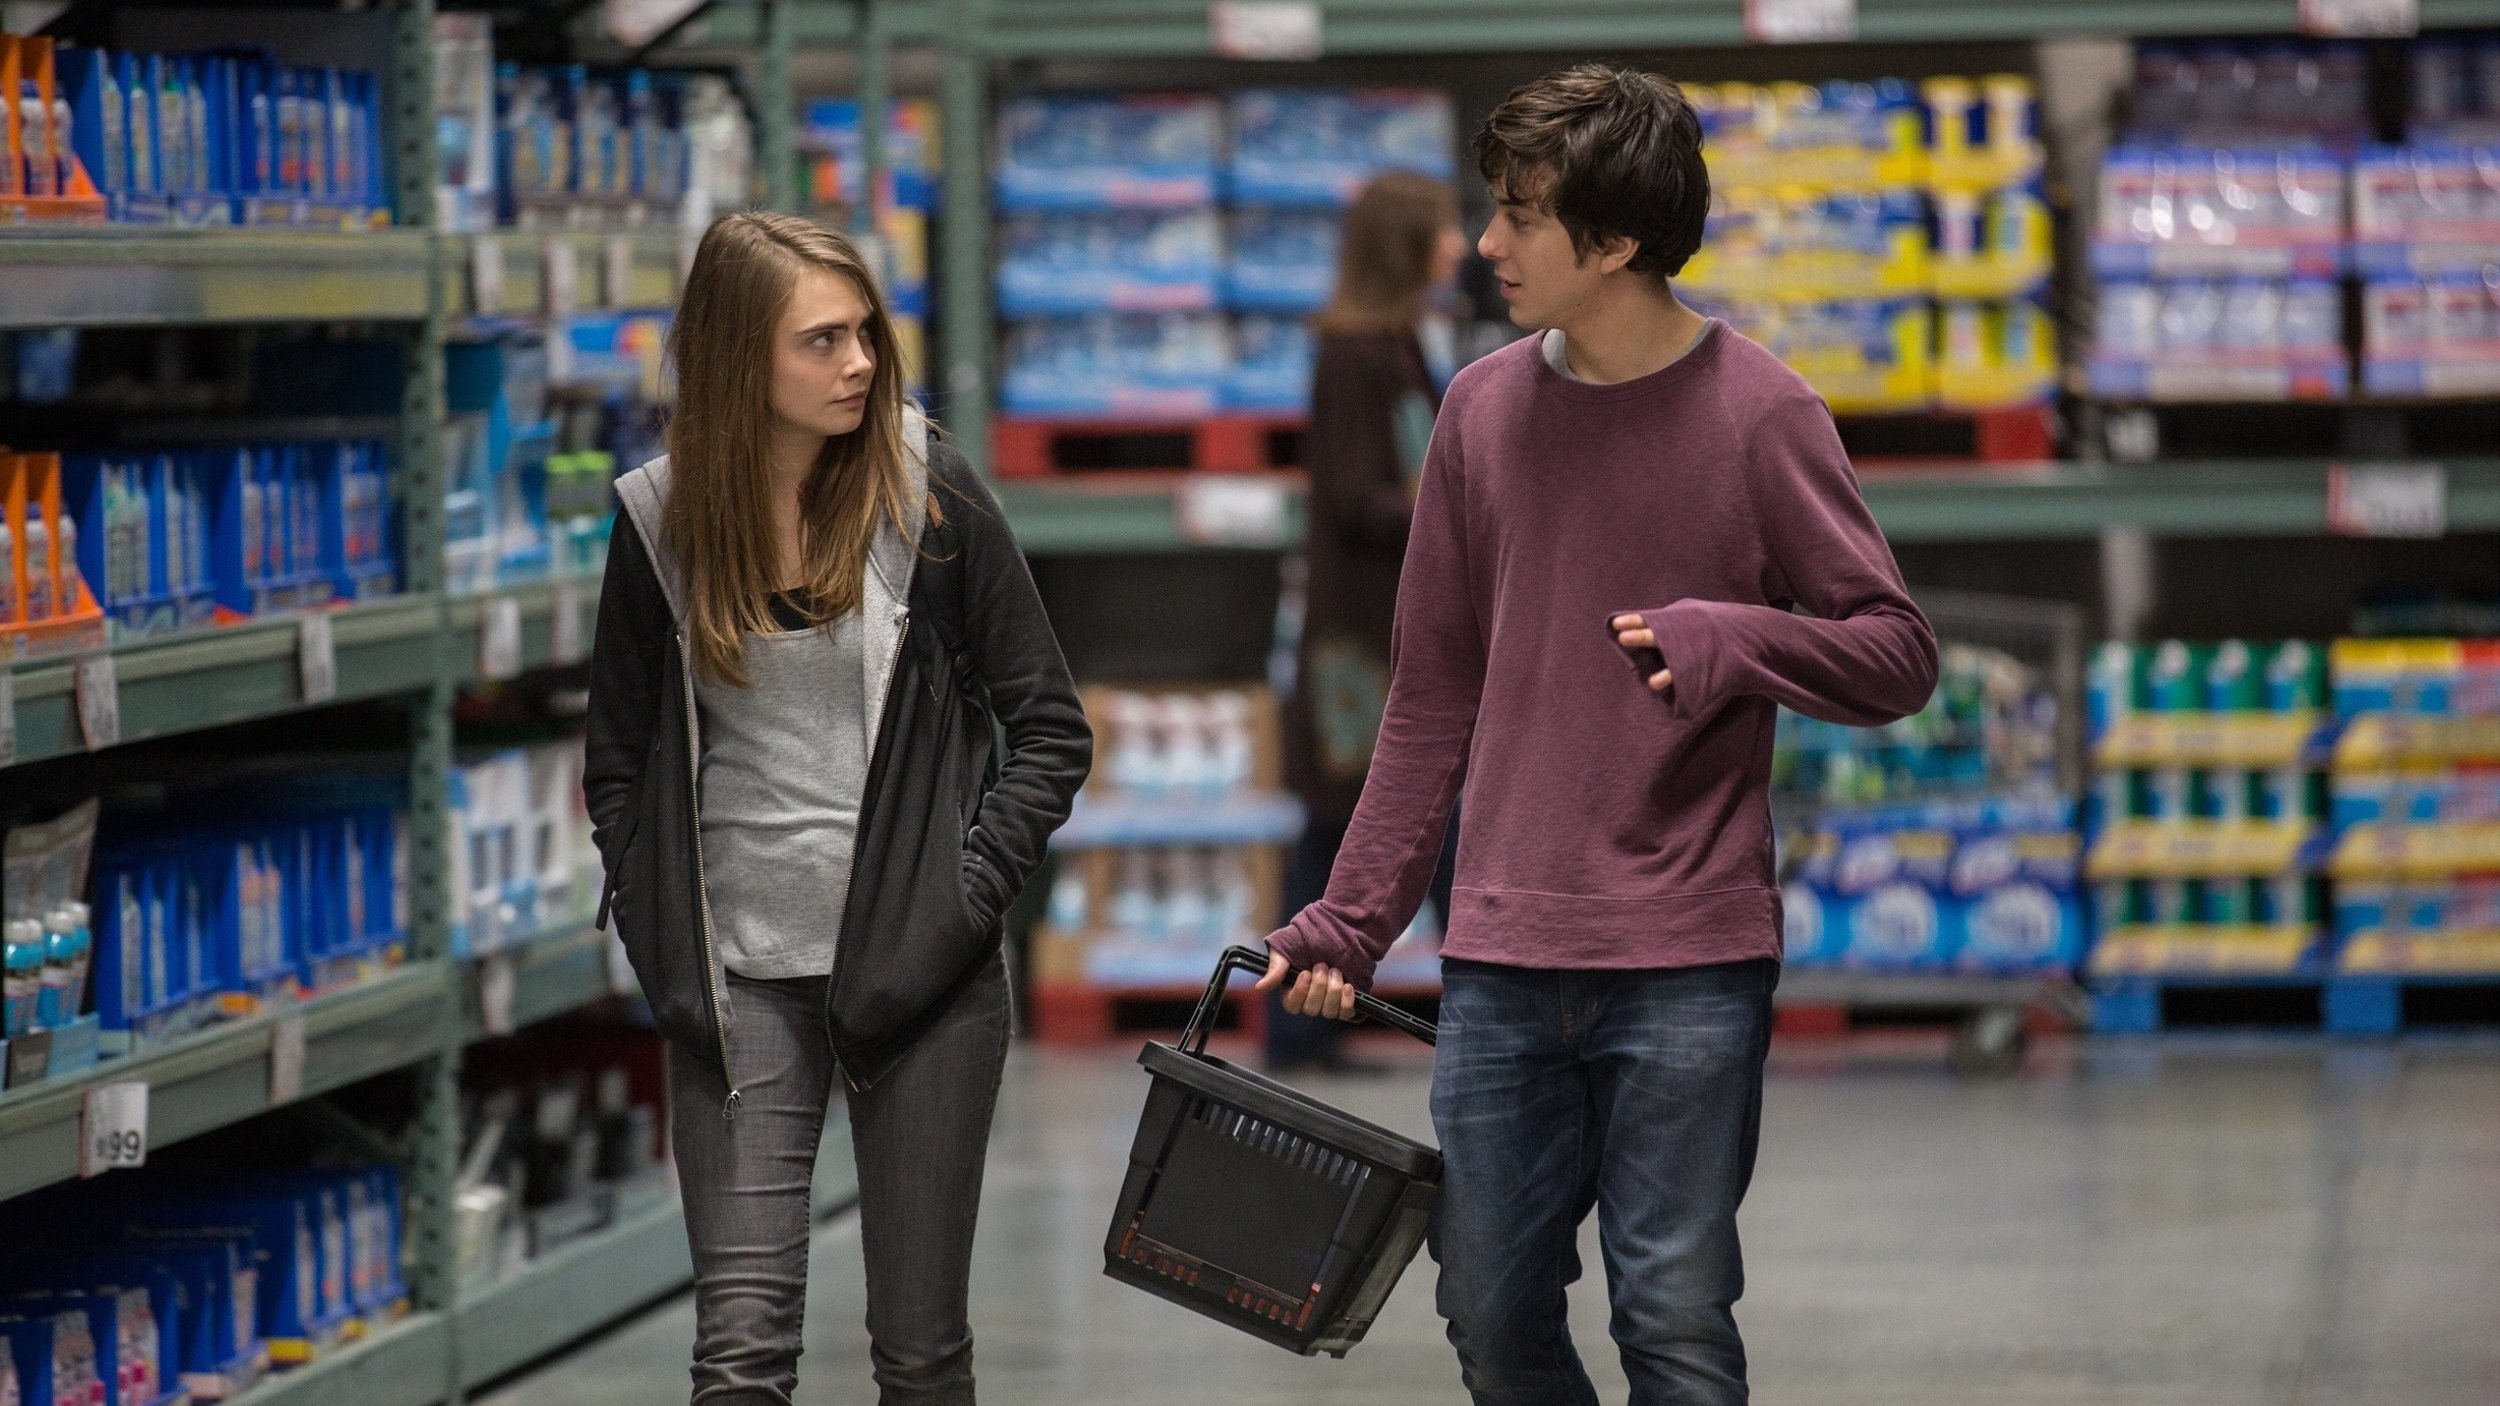 <p>The adaptation of John Green’s “The Fault in Our Stars” was hugely successful, so the film industry decided to try its luck again by adapting an early book from the YA author. Unlike “The Fault in Our Stars,” “Paper Towns” was just sort of a bland mess. It was a low-budget movie, so it made money, but nobody, other than some teens who love any tragic romance story, seemed to really like it. “Paper Towns” has a 56 percent rating on Rotten Tomatoes and on Metacritic.</p><p>You may also like: <a href='https://www.yardbarker.com/entertainment/articles/25_underrated_science_fiction_movies_120823/s1__39032104'>25 underrated science fiction movies</a></p>